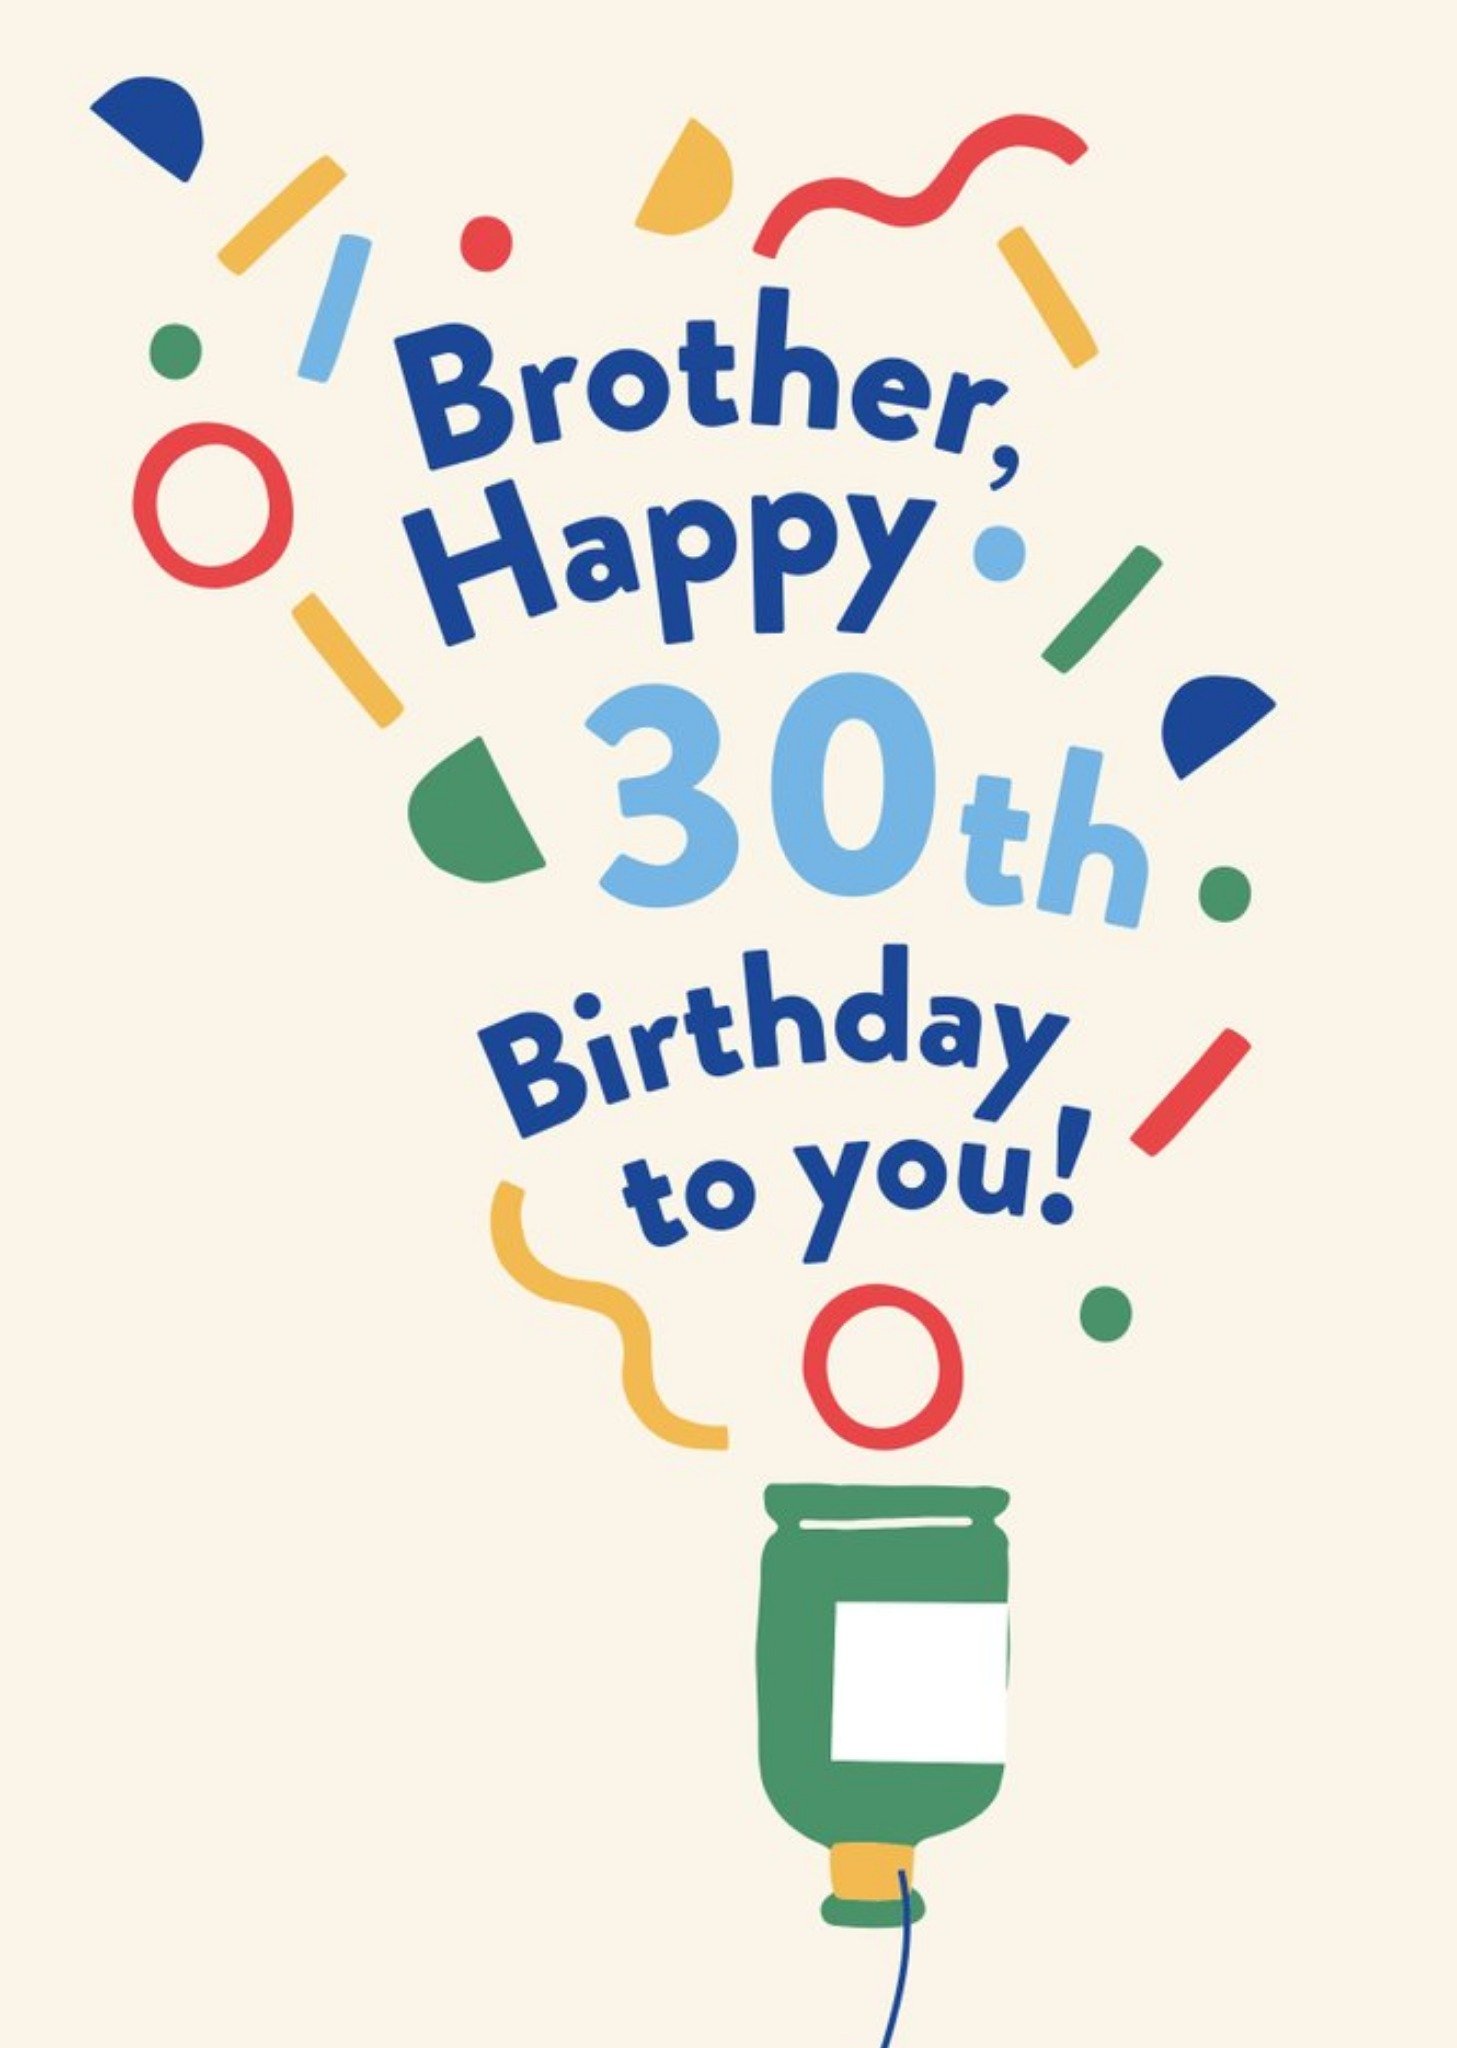 Moonpig Illustrated Modern Party Popper Design Brother Happy 30th Birthday To You Card, Large